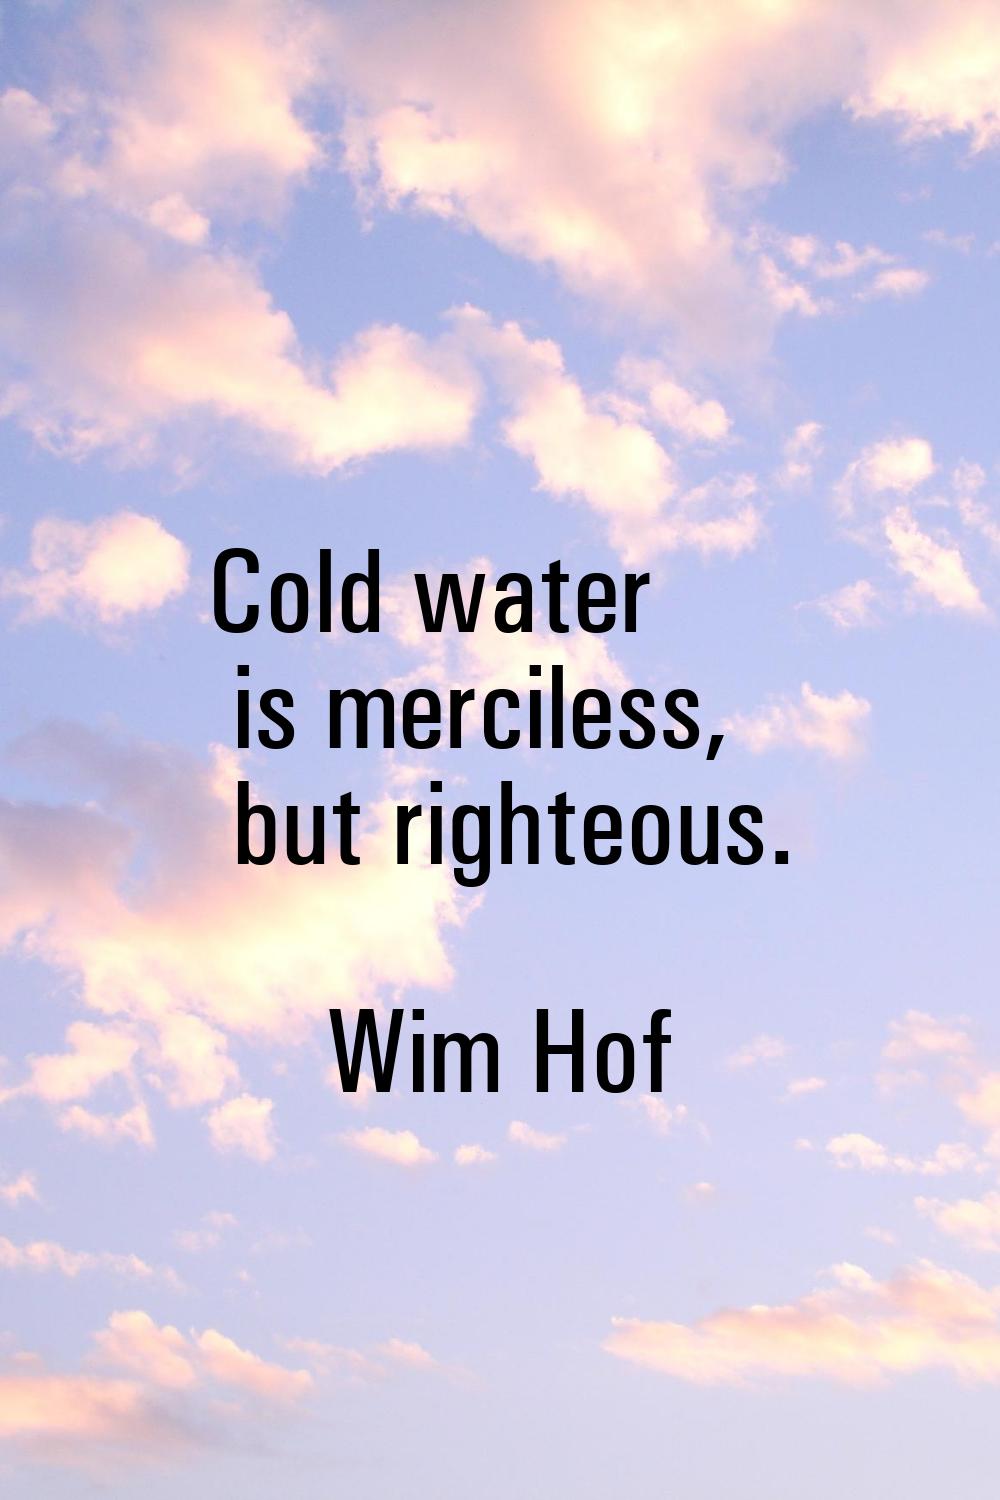 Cold water is merciless, but righteous.